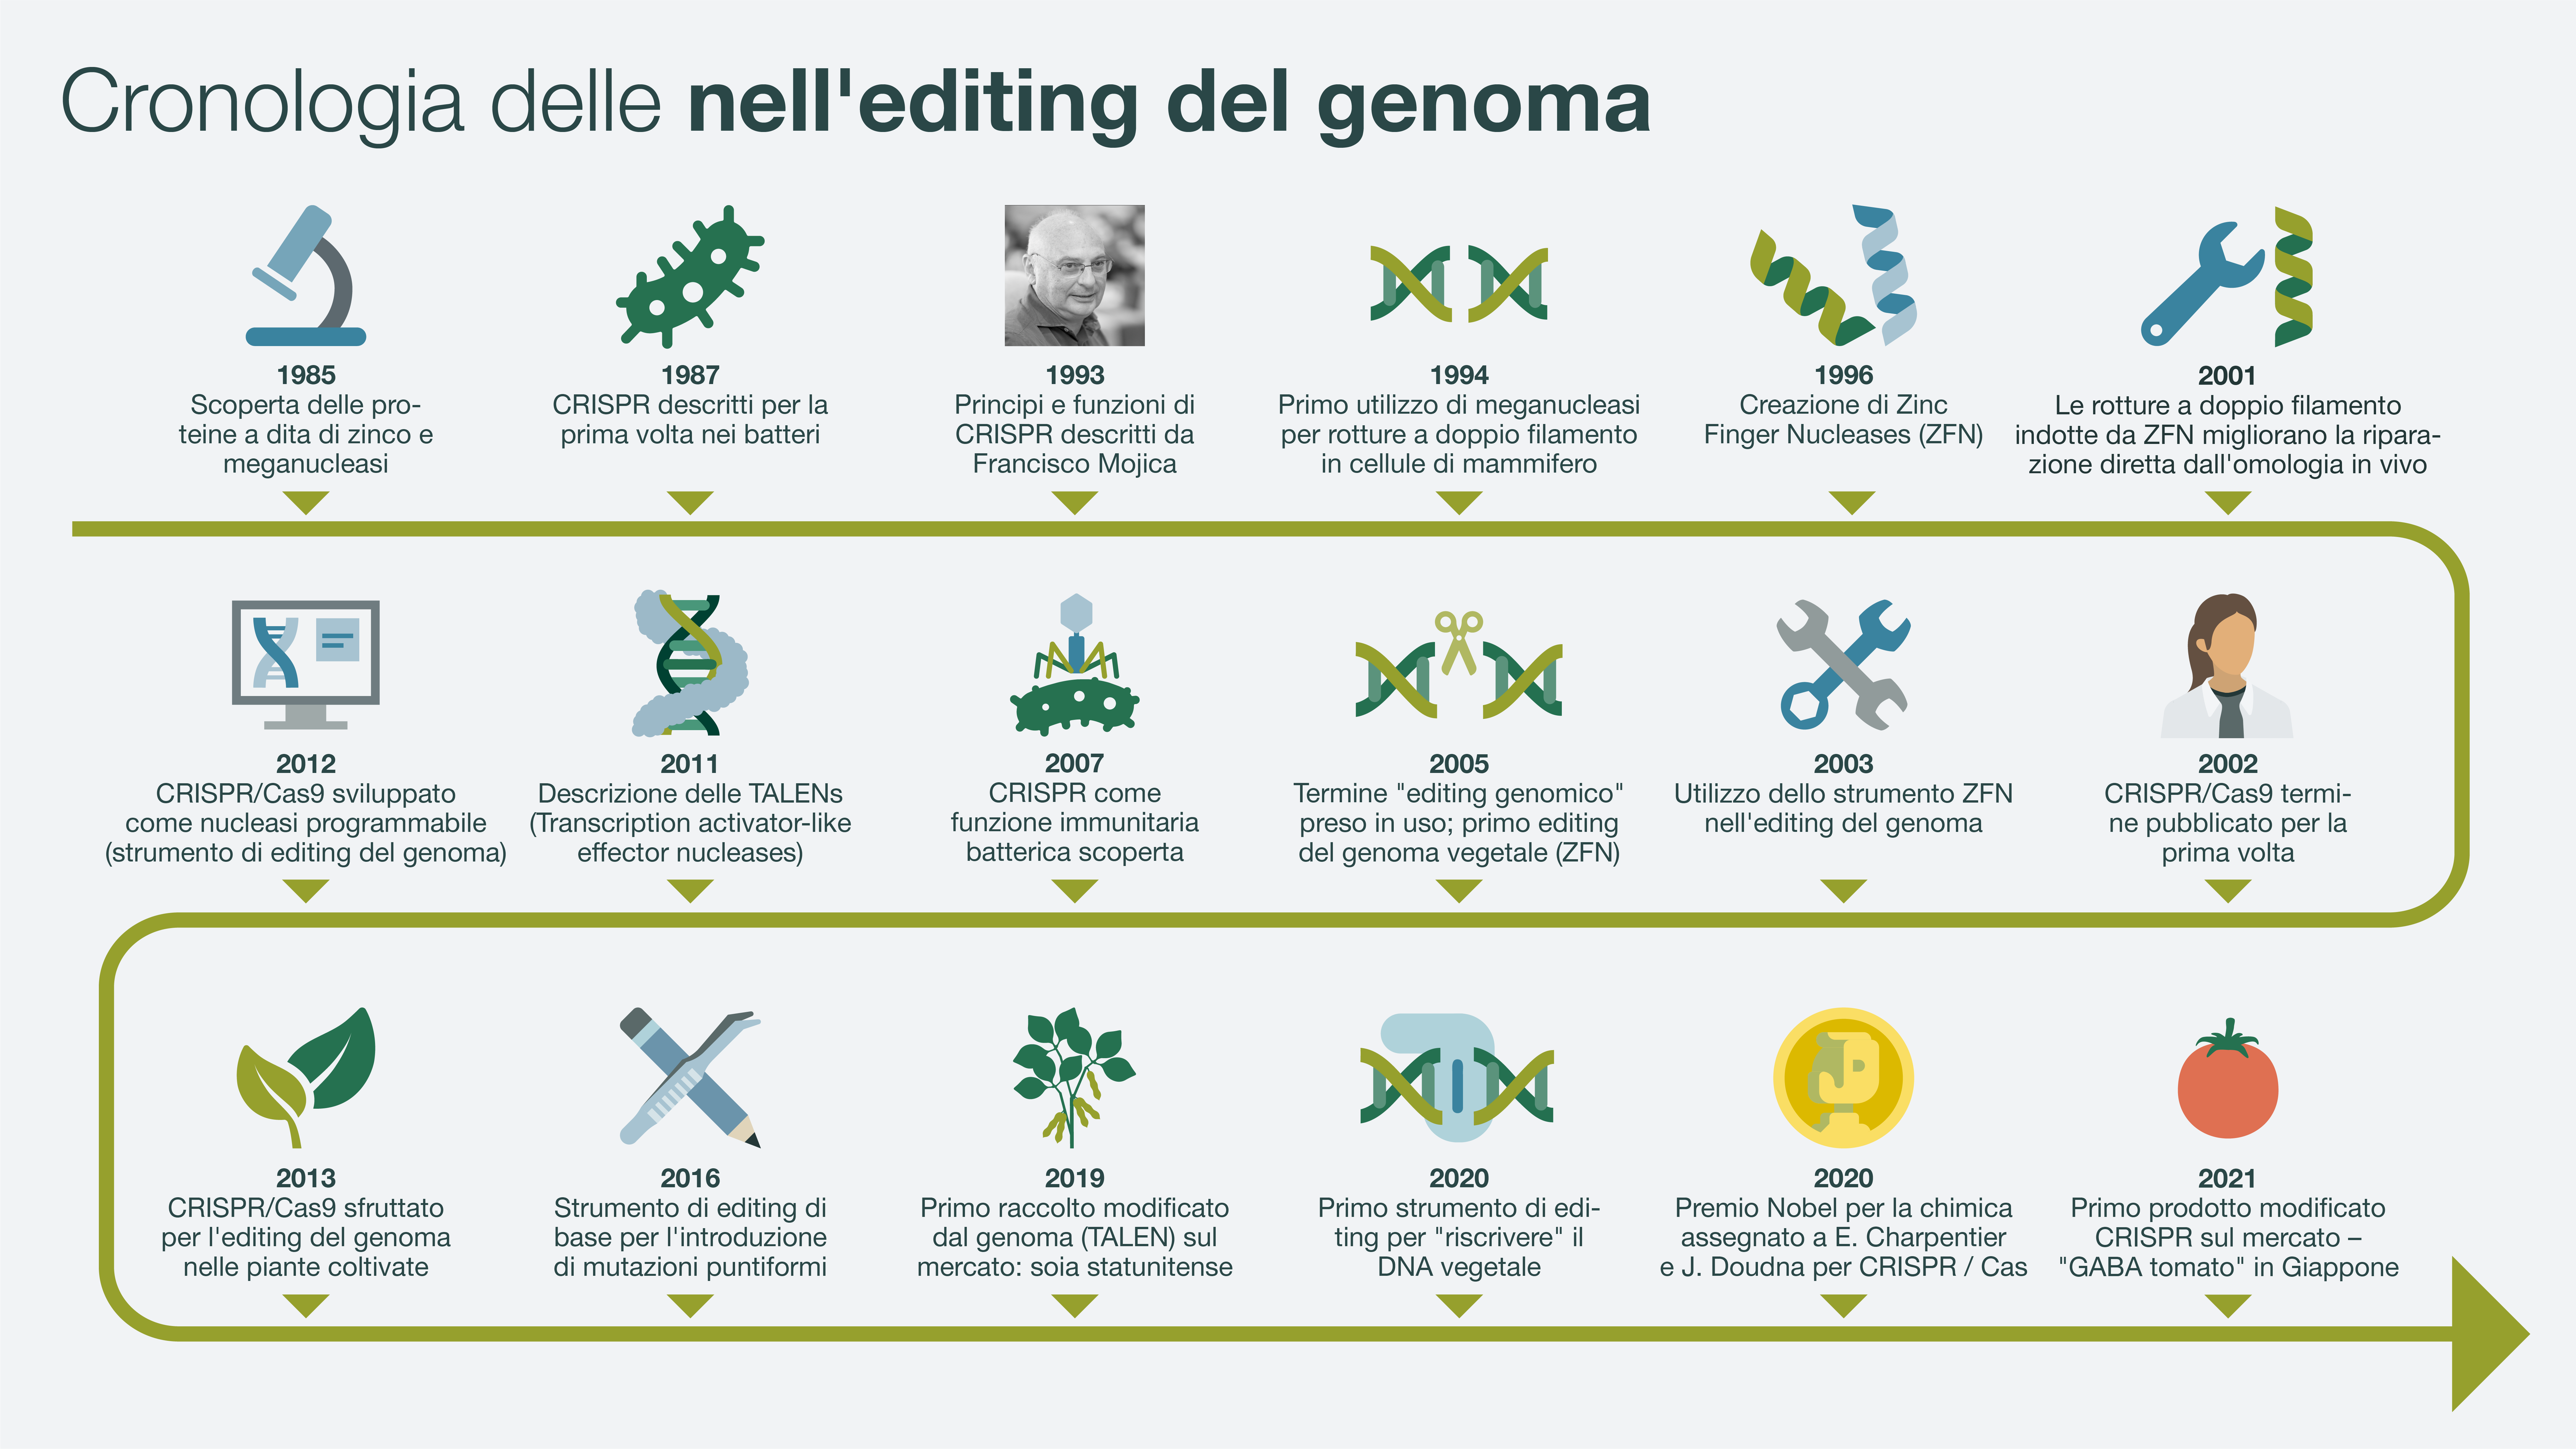 Timeline Infographic showing the most important innovations in genome editing